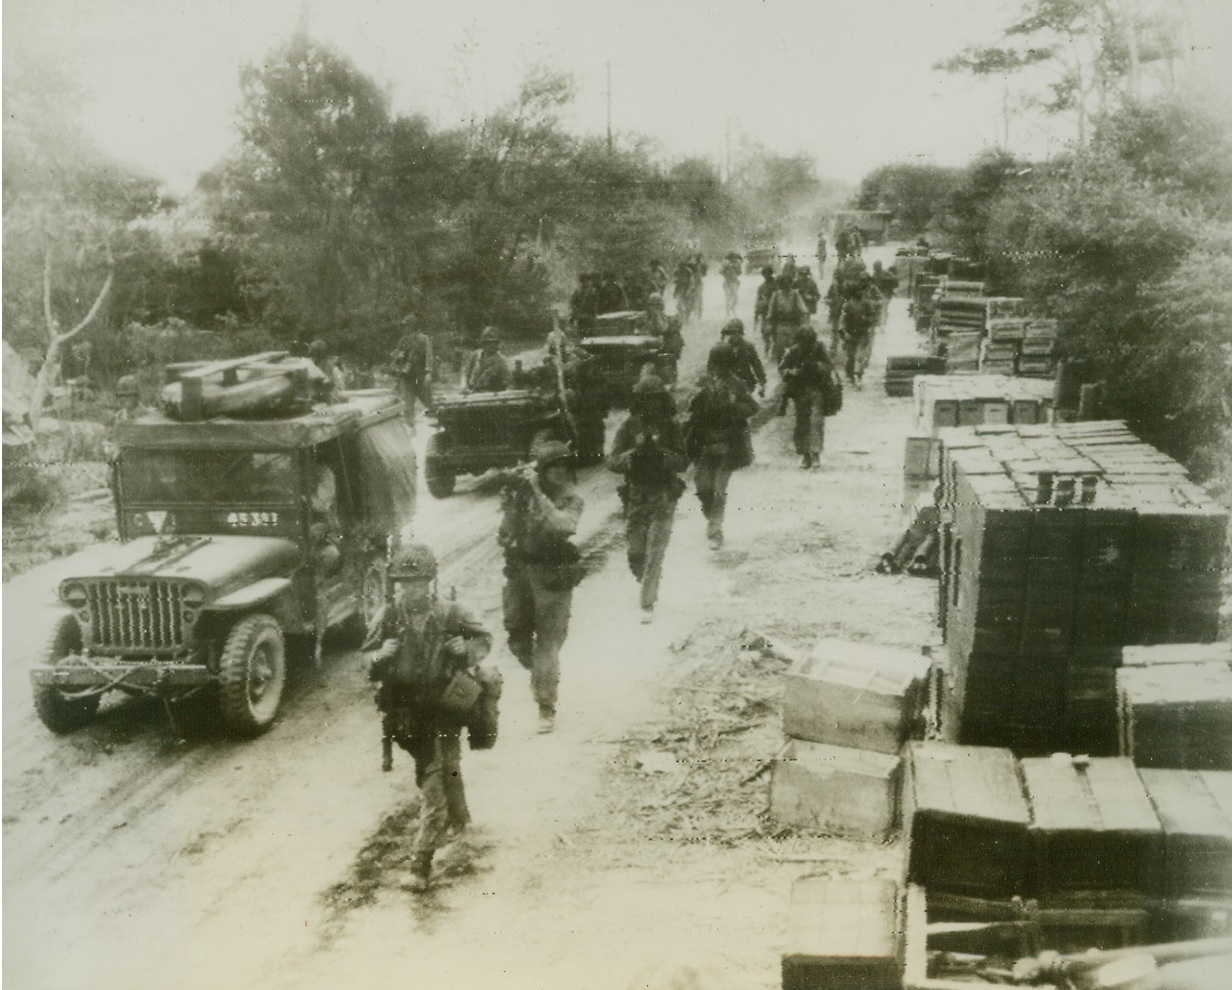 Yanks Move Up On Saipan Front, 6/24/1944. SAIPAN, M.I.—Along a Saipan road lined with ammunition cases, American troops and trucks move up to the front lines to reinforce leathernecks and doughboys engaged in bitter fighting for the vital Jap base. Photo radioed from Honolulu. Credit: ACME;